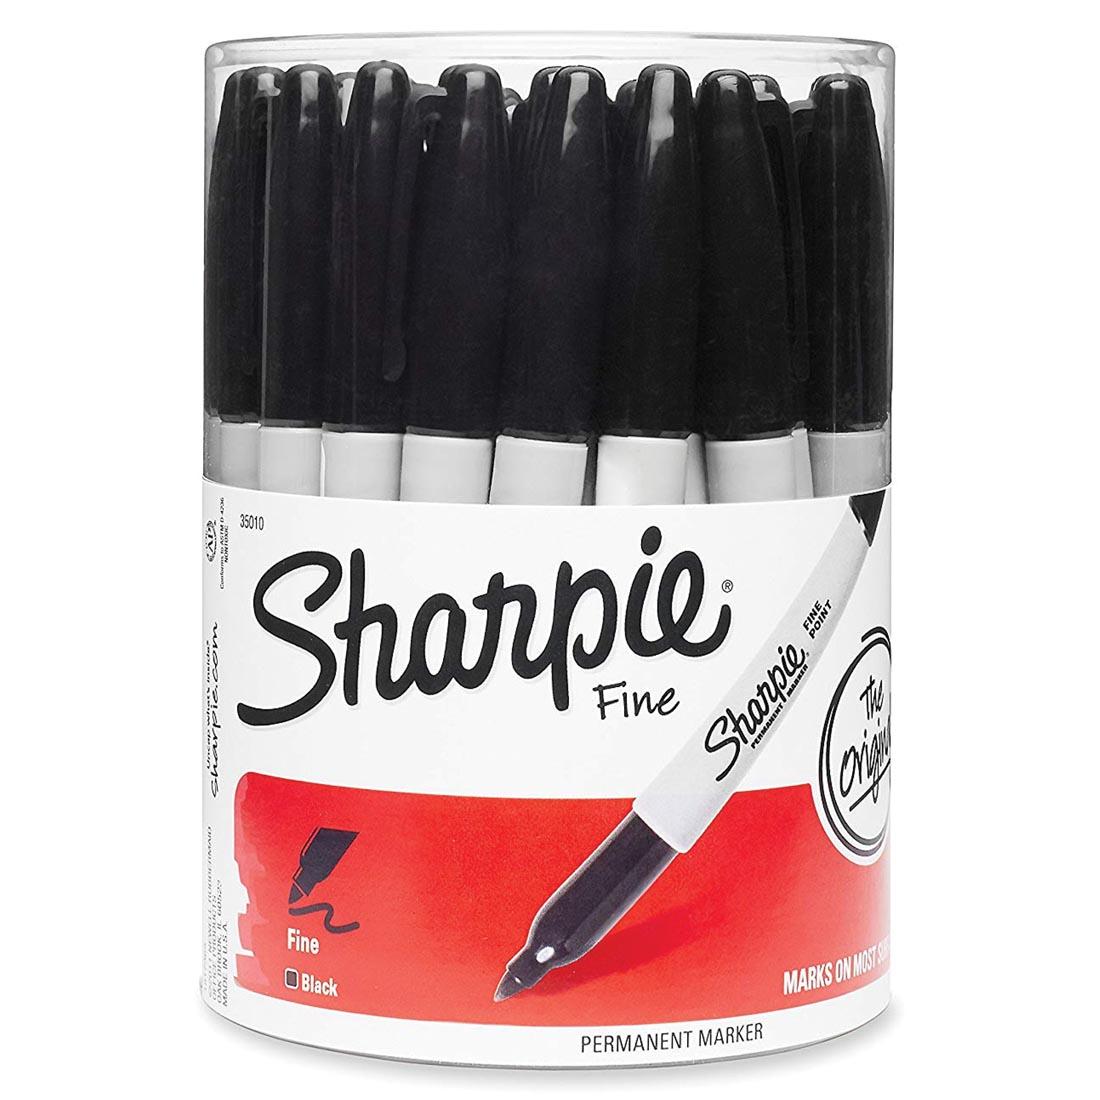 Canister of Black Sharpie Fine Point Permanent Markers